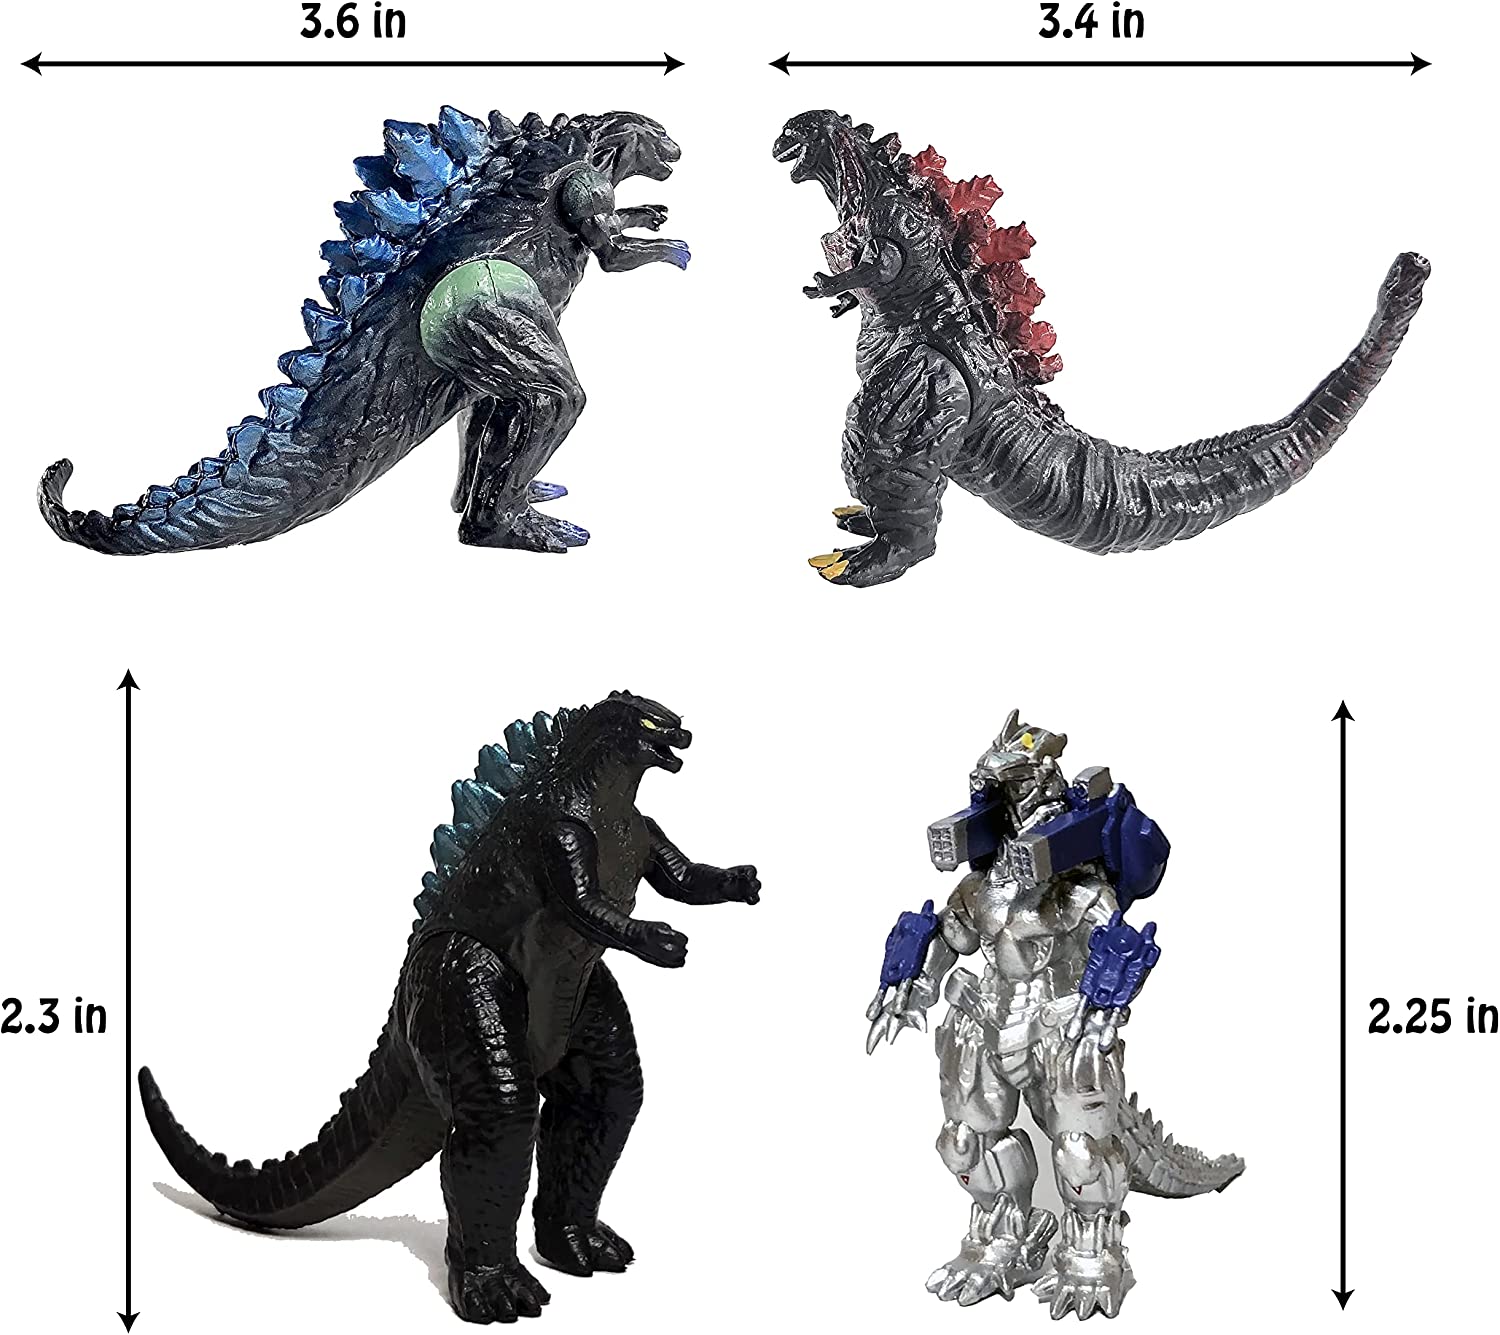 Buy TwCare Godzilla Toy Action Figure: King of The Monsters, 2020 Movie  Series Movable Joints Soft Vinyl, Carry Bag Online at Low Prices in India 